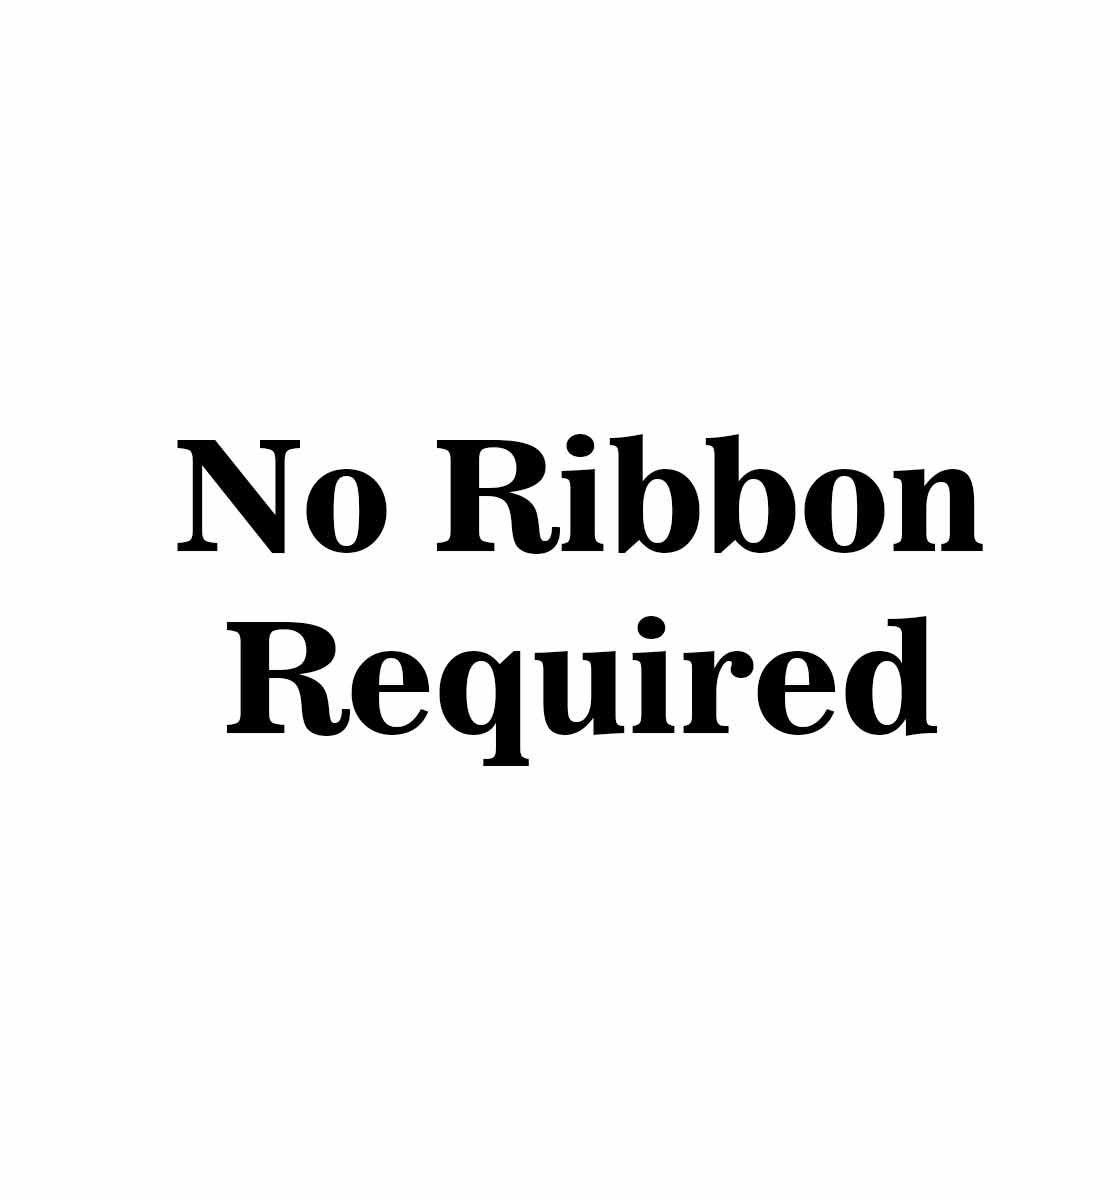 No Ribbon Required